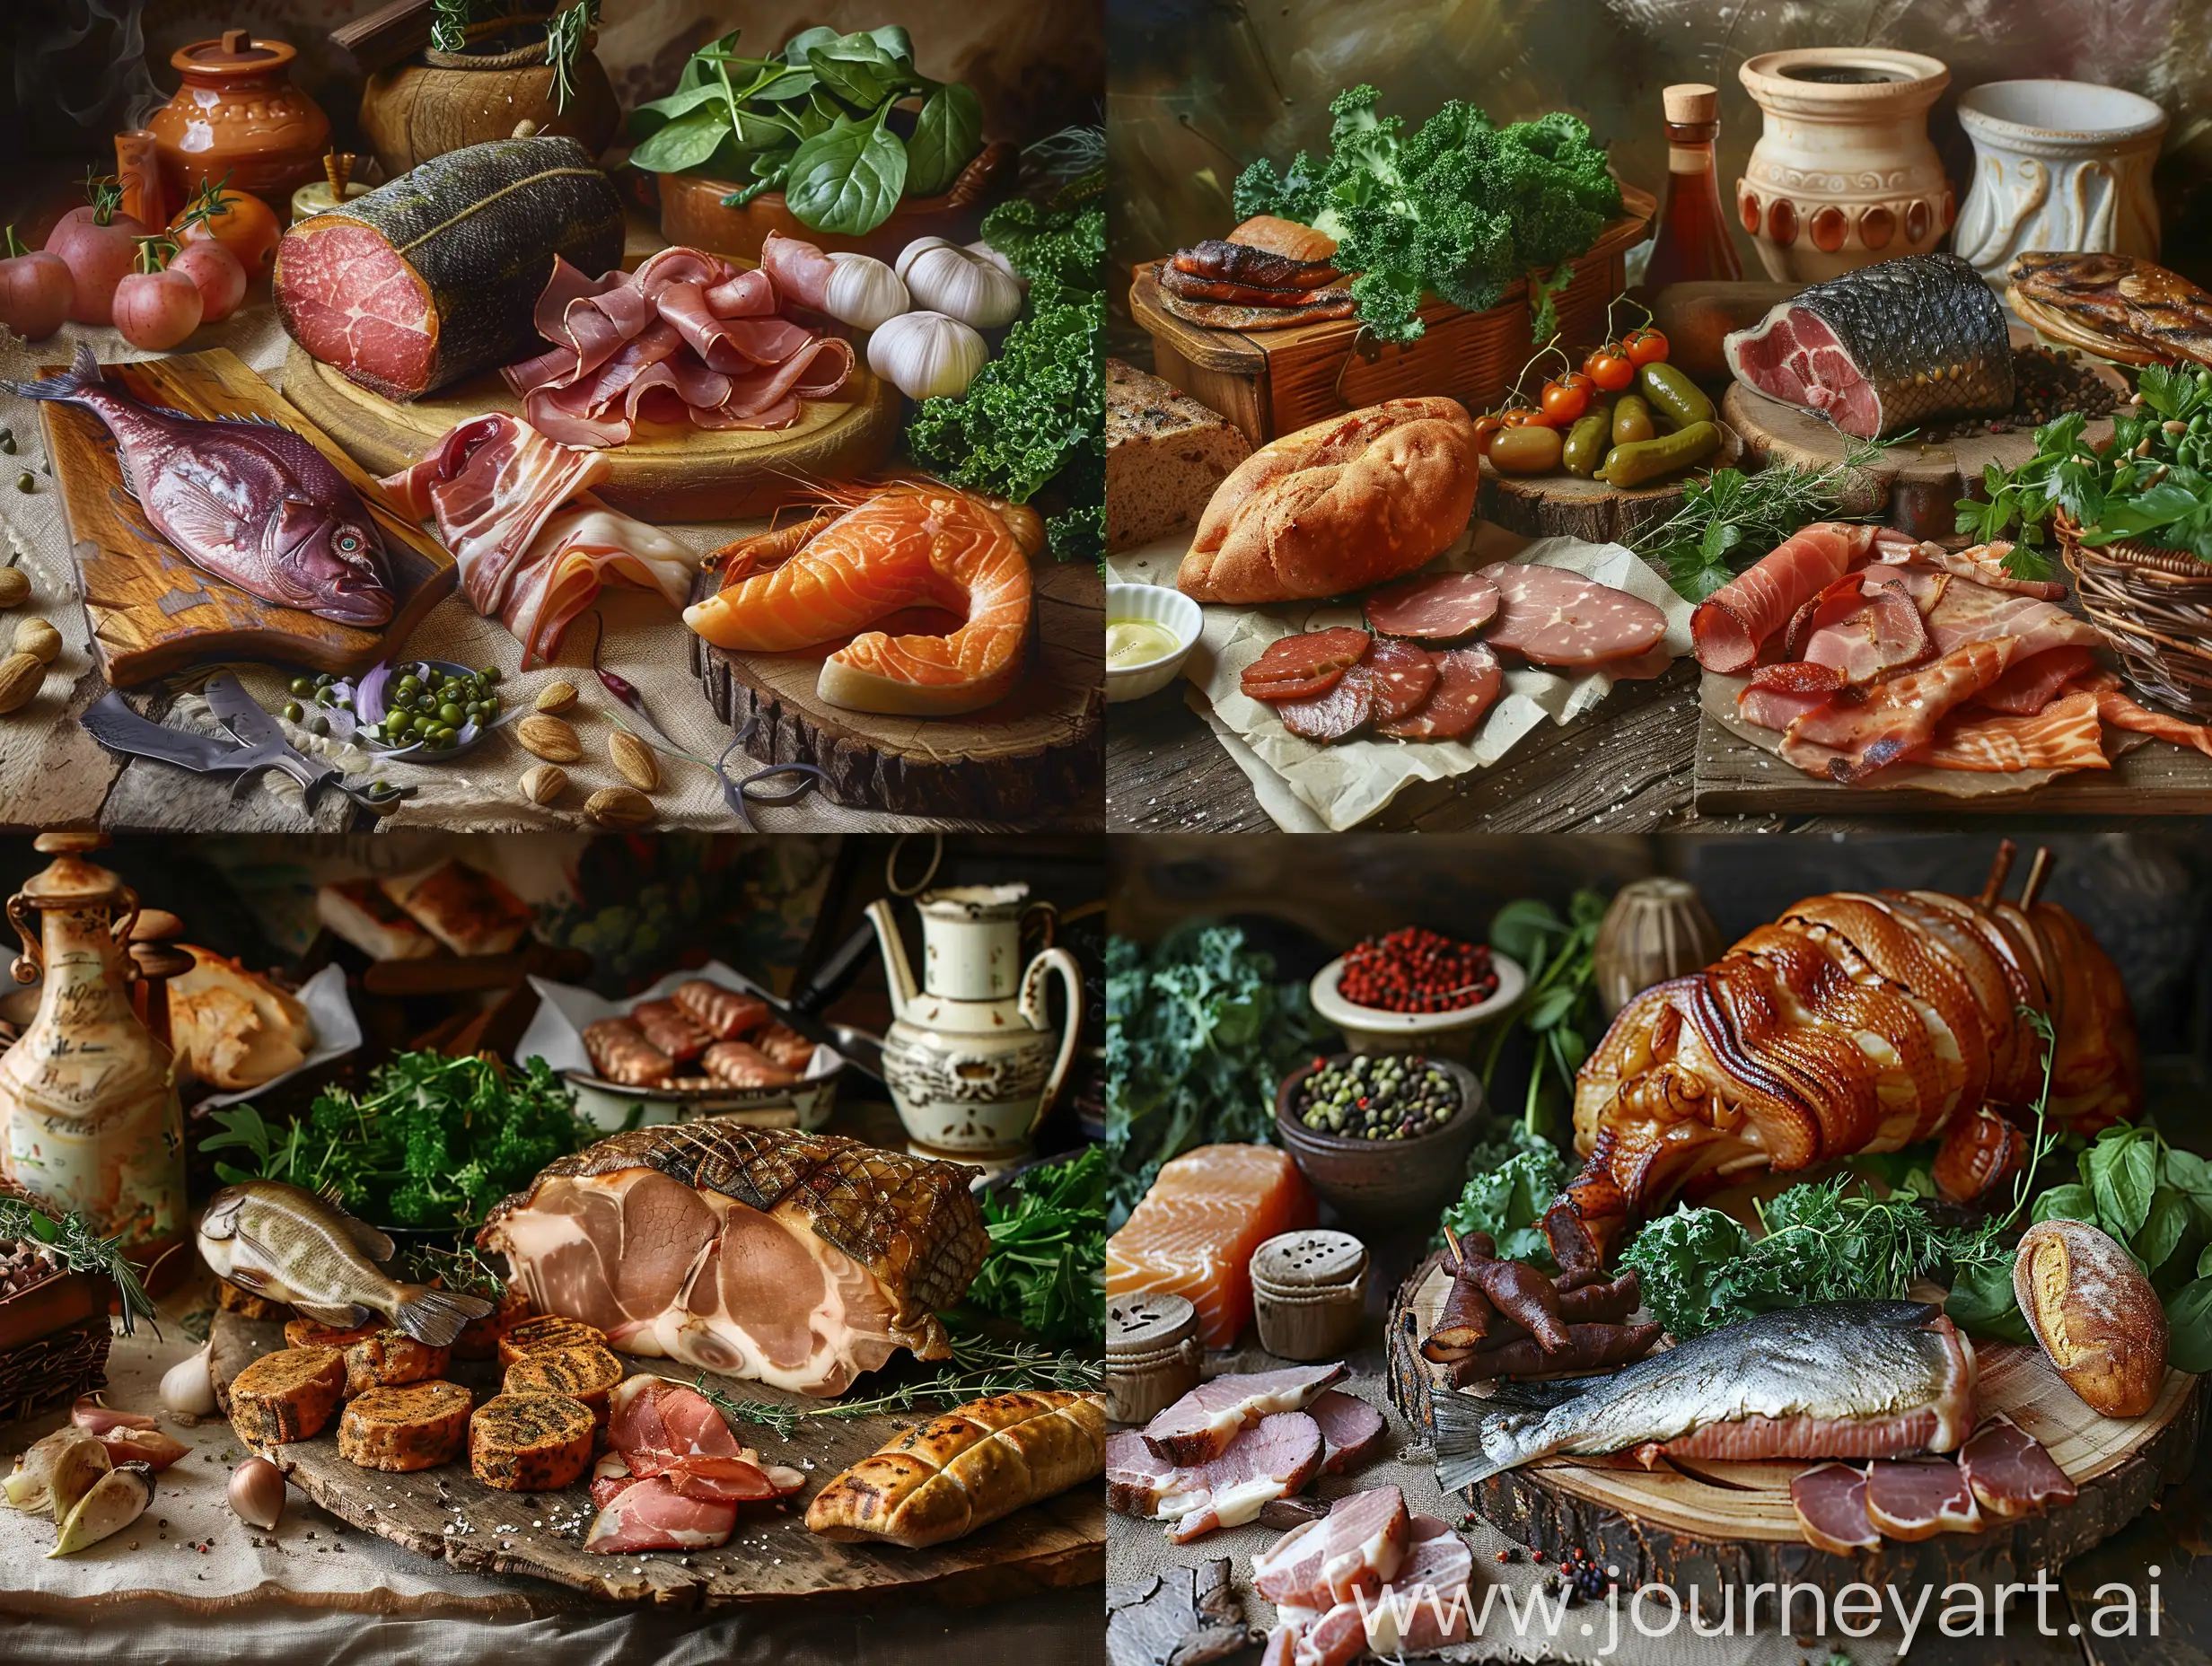 Homemade-Smoked-Products-on-Rural-Table-Fresh-Meats-Fish-and-Greens-CloseUp